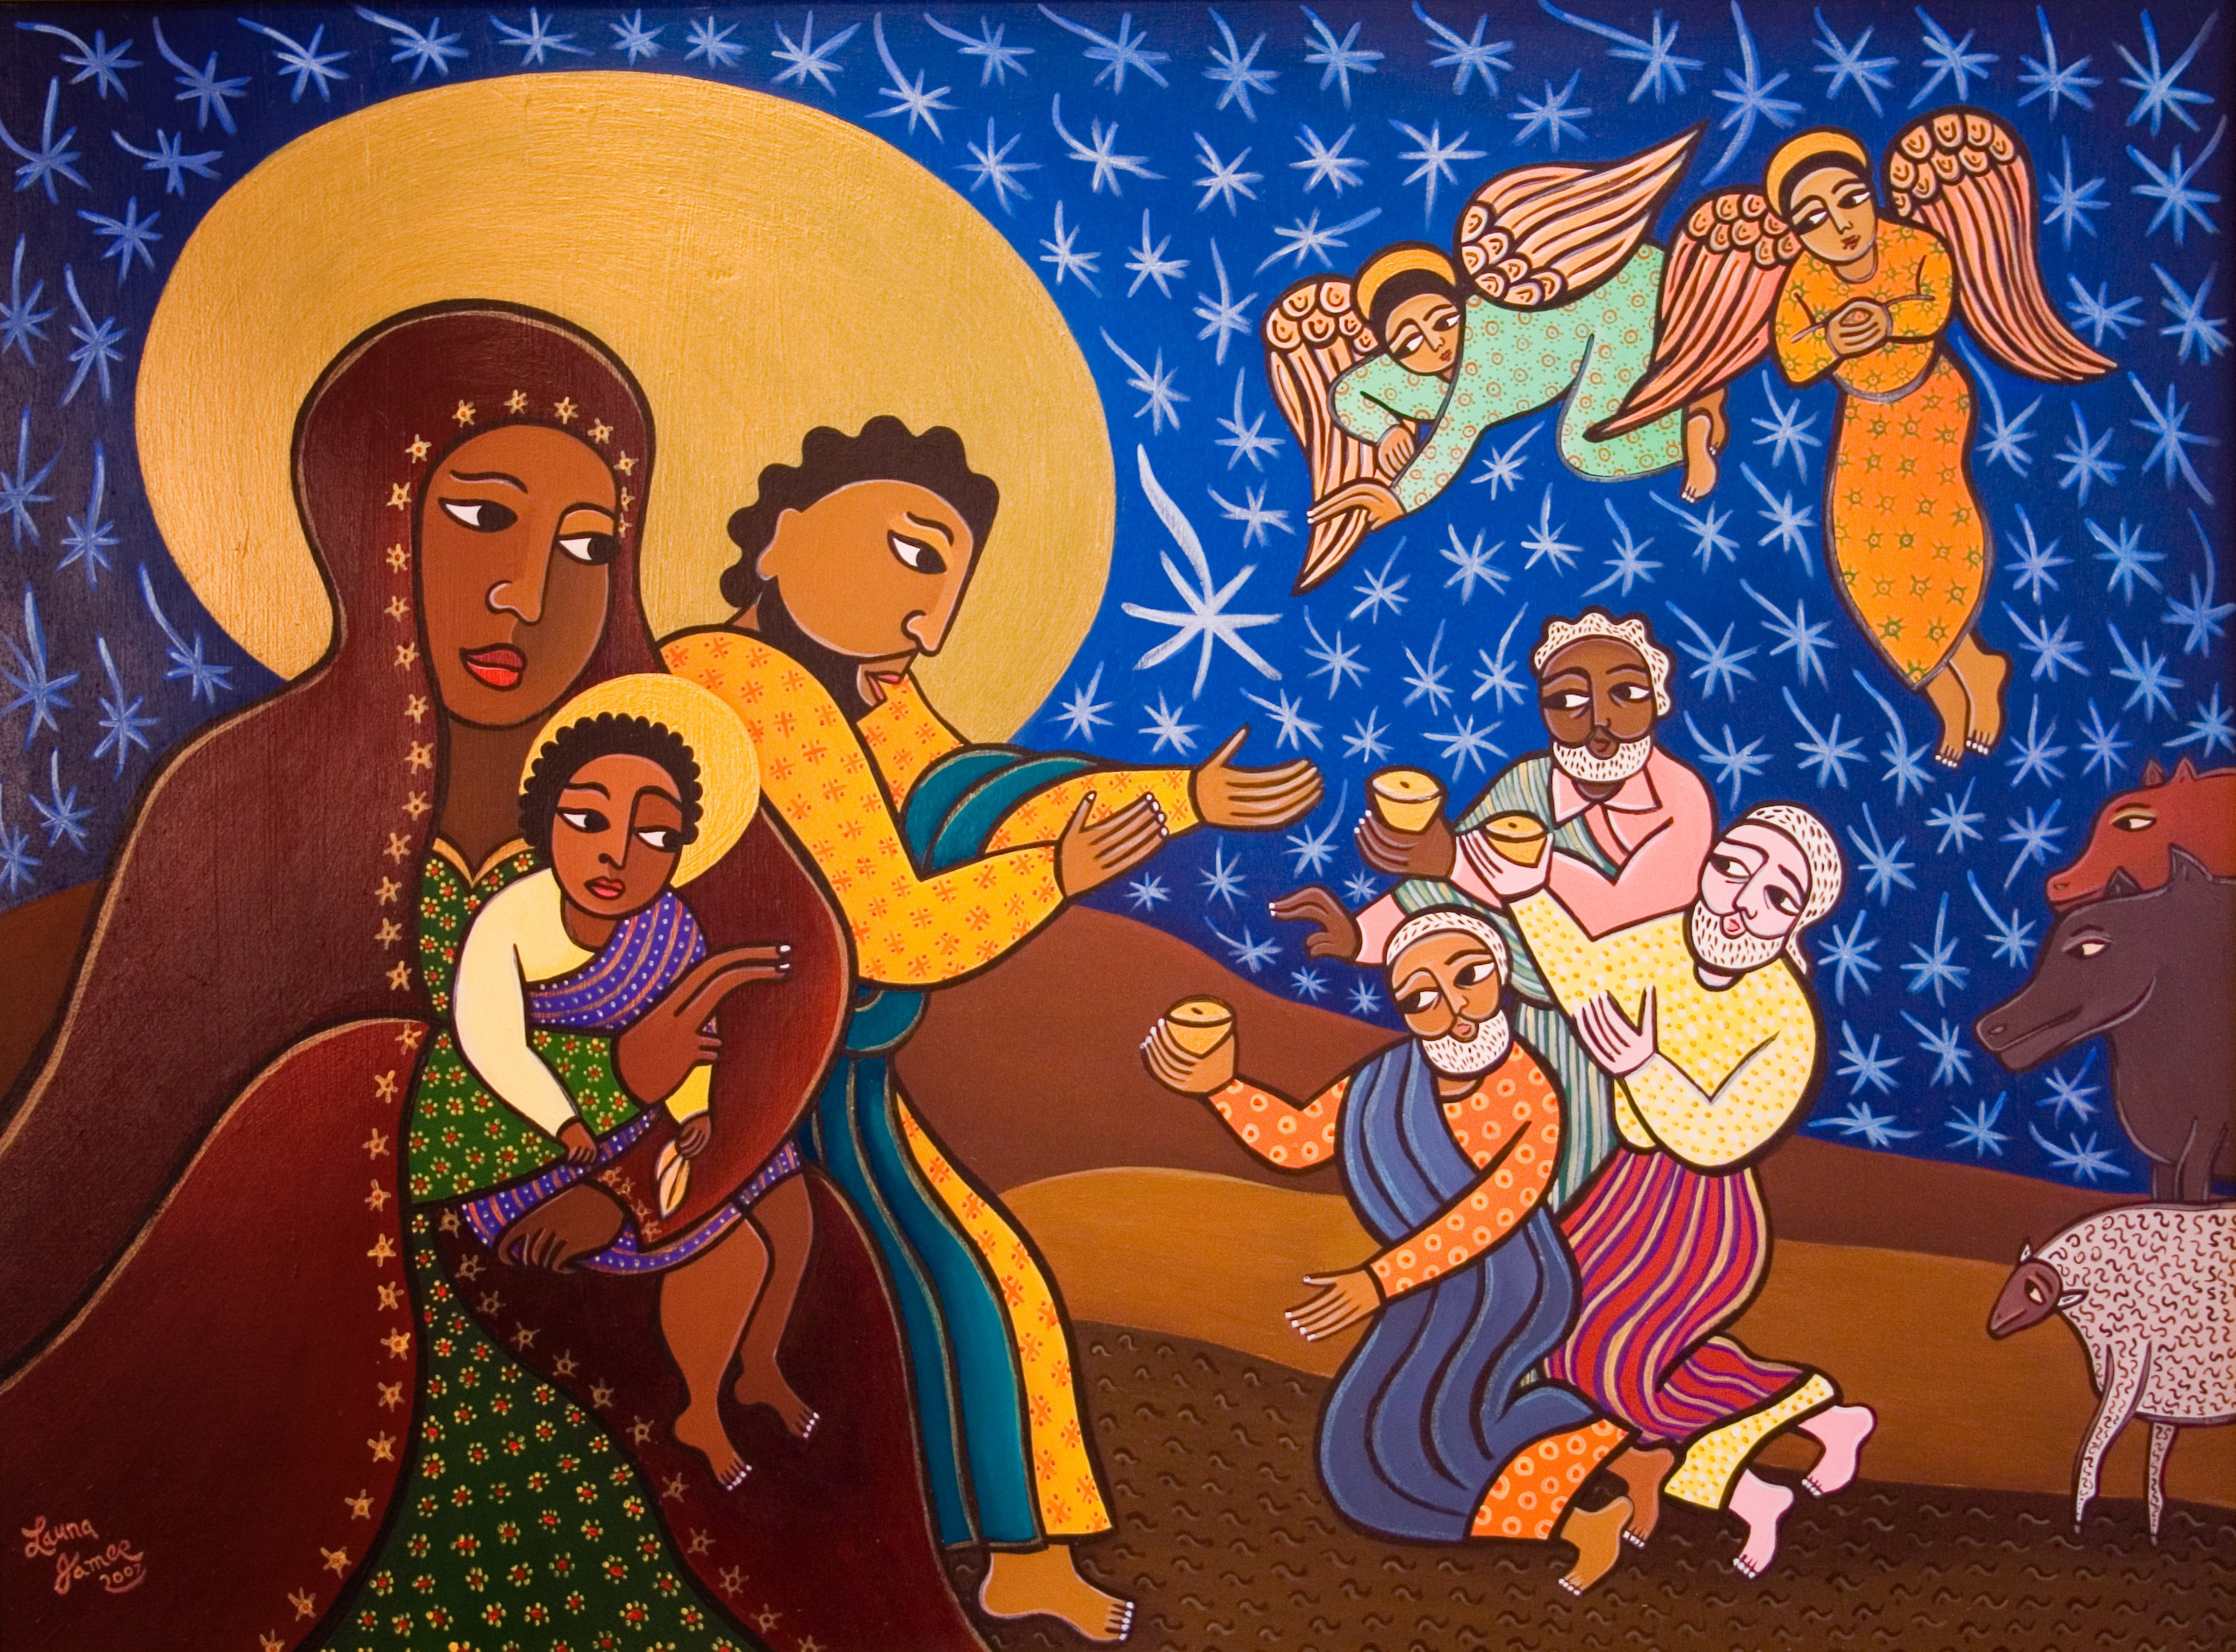 The Holy Family at the Nativity is depicted in this painting by artist Laura James. (CNS/Bridgeman Images)